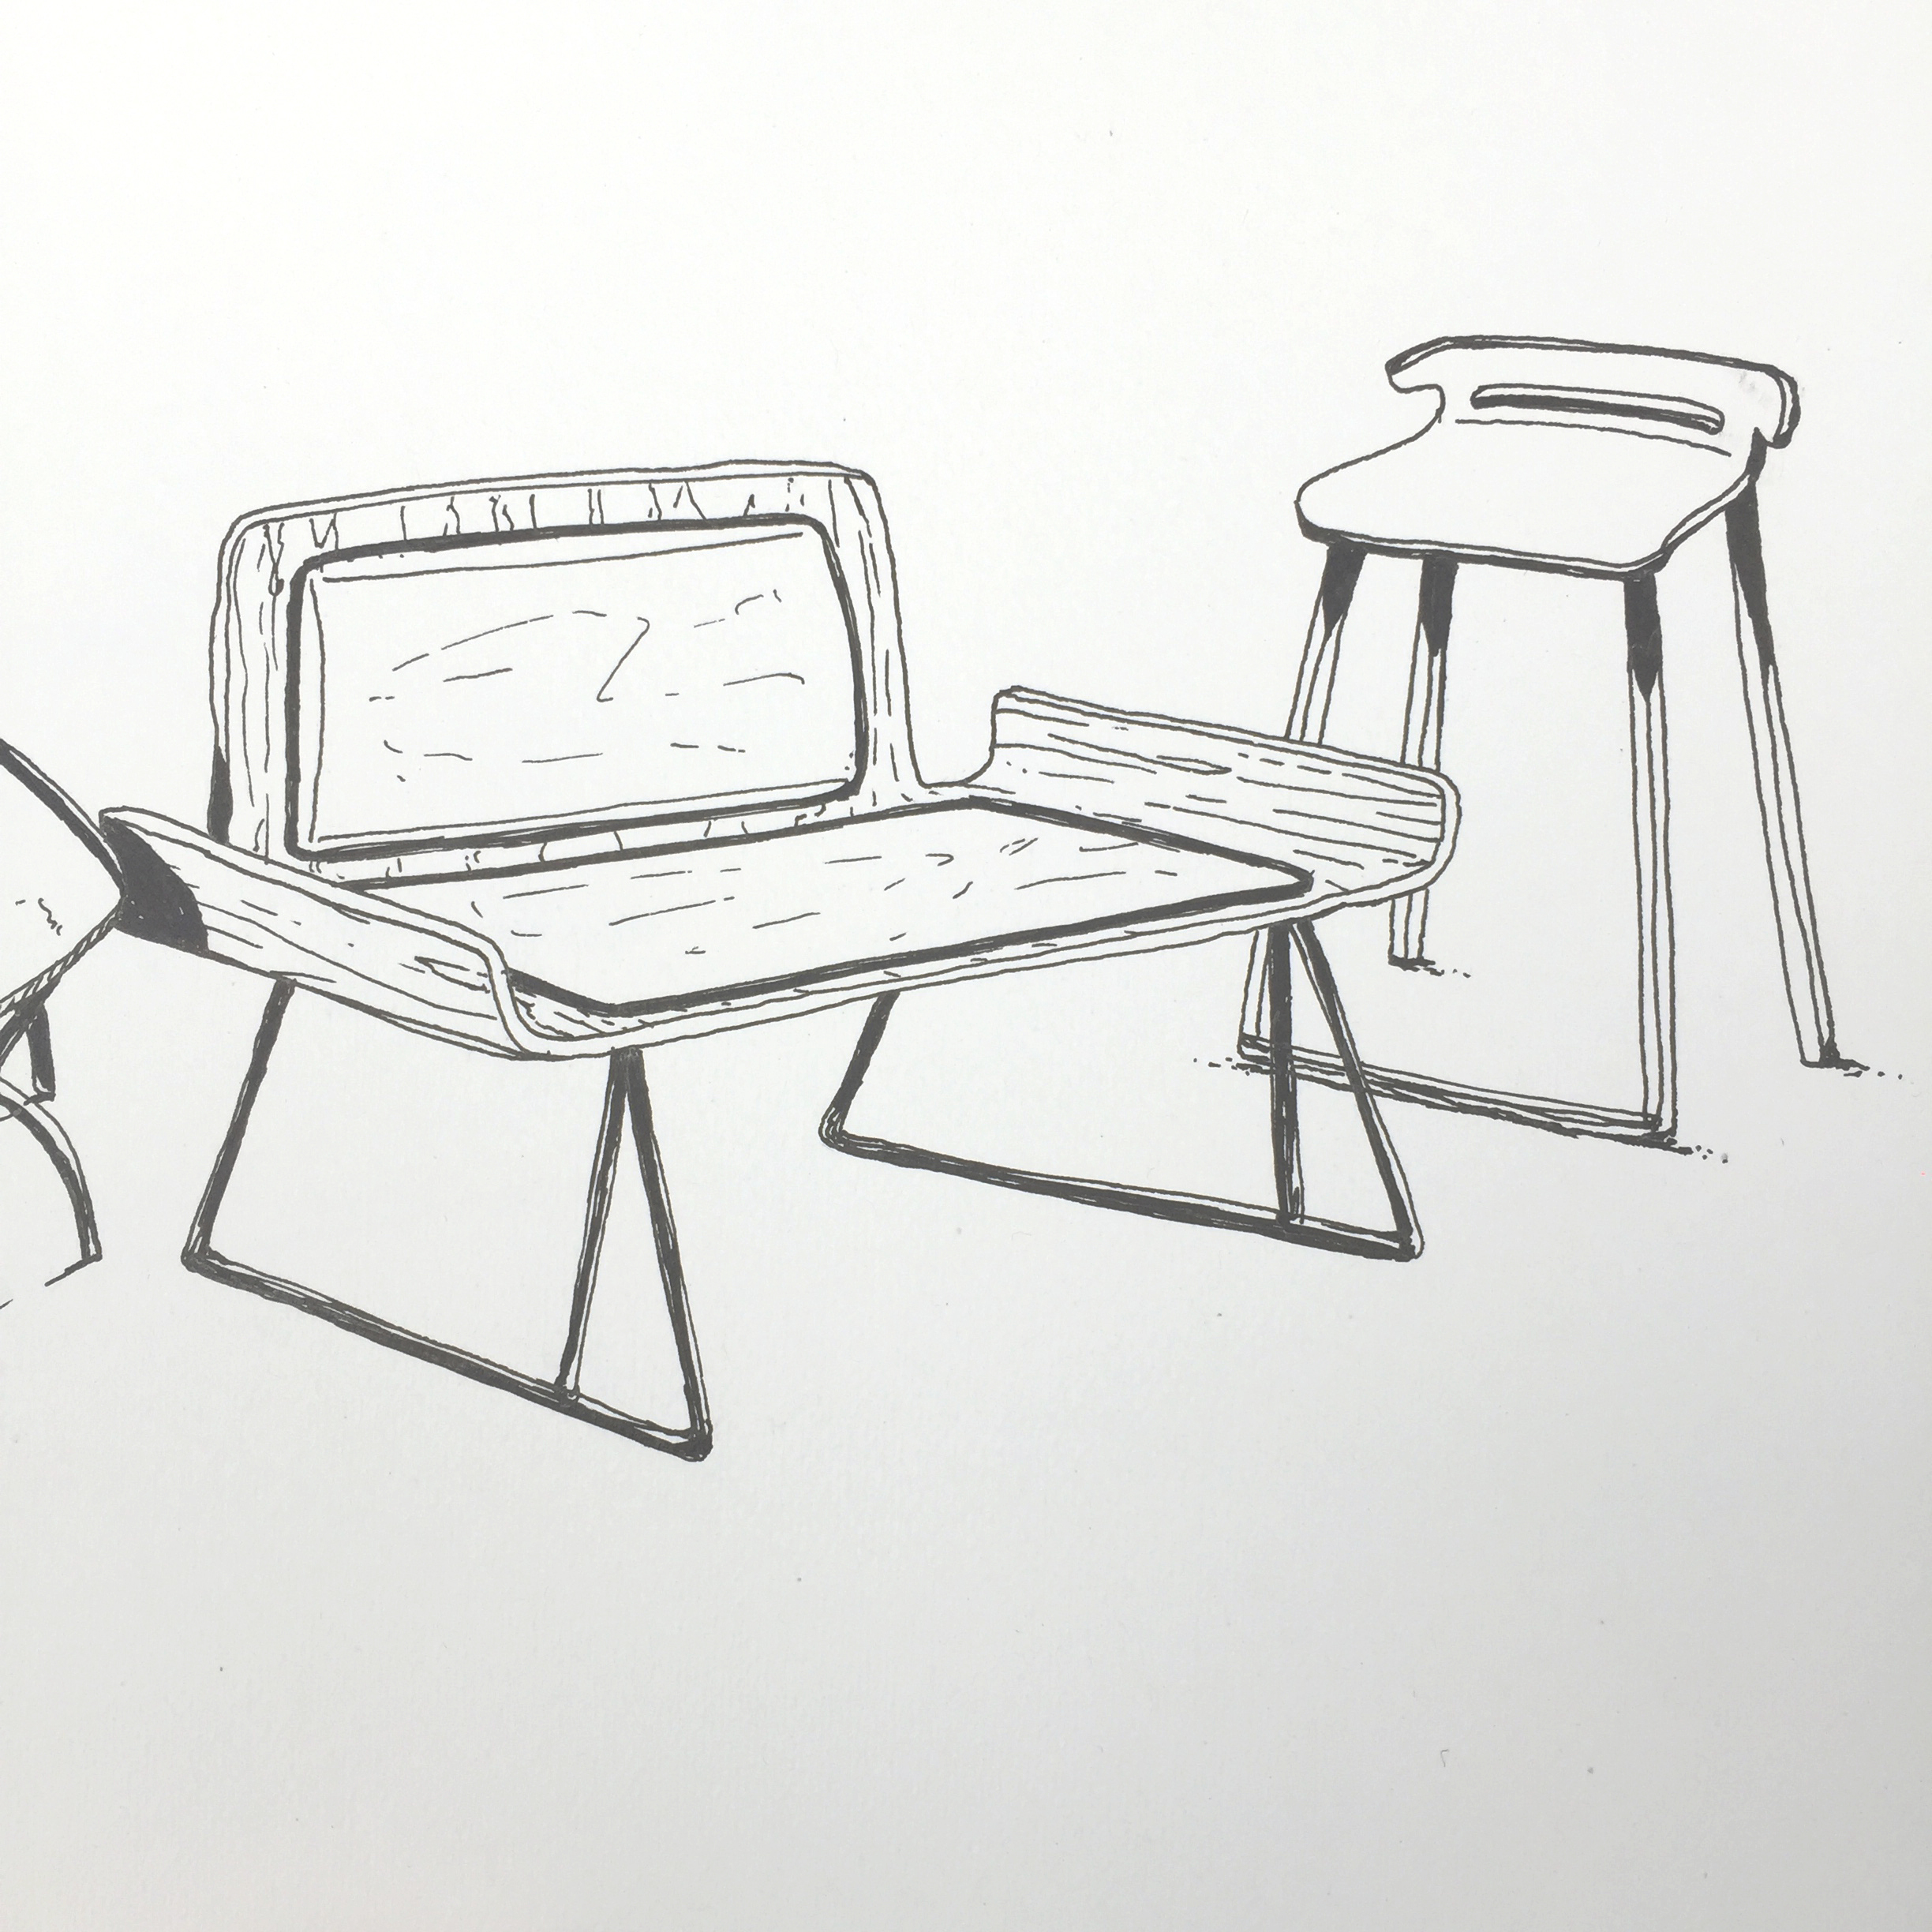 Chairs and stools doodle by Sebastian Galo